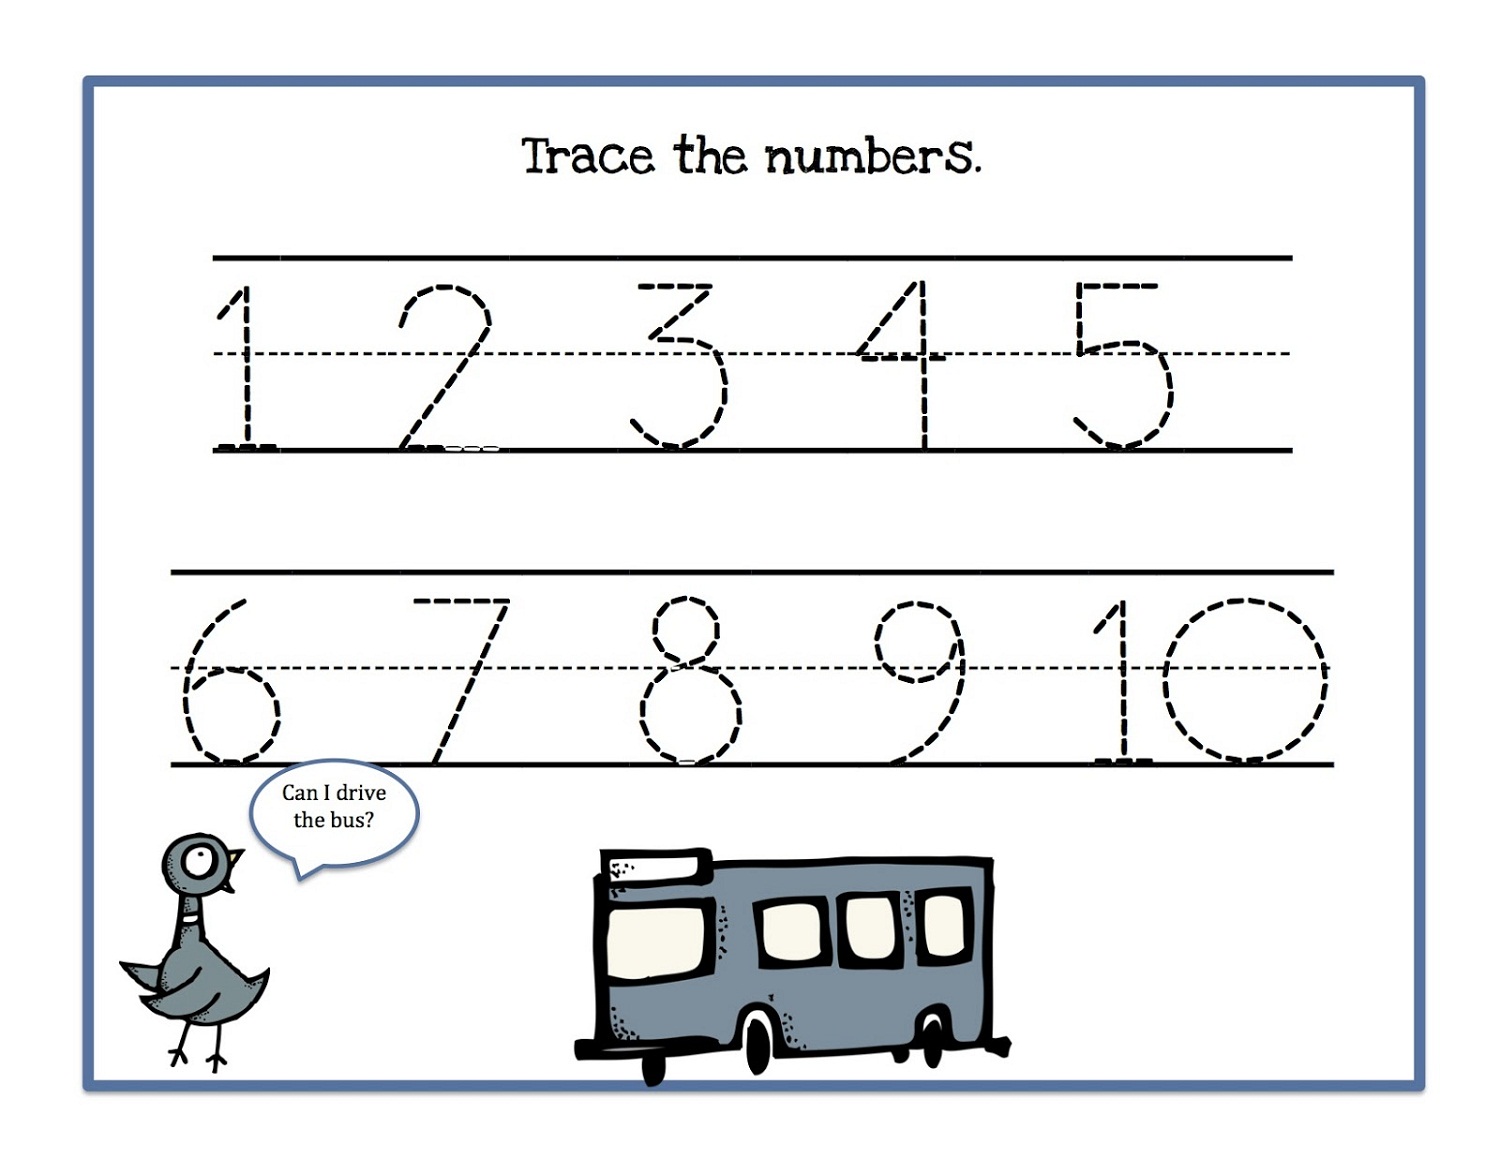 tracing-numbers-1-10-worksheets-activity-shelter